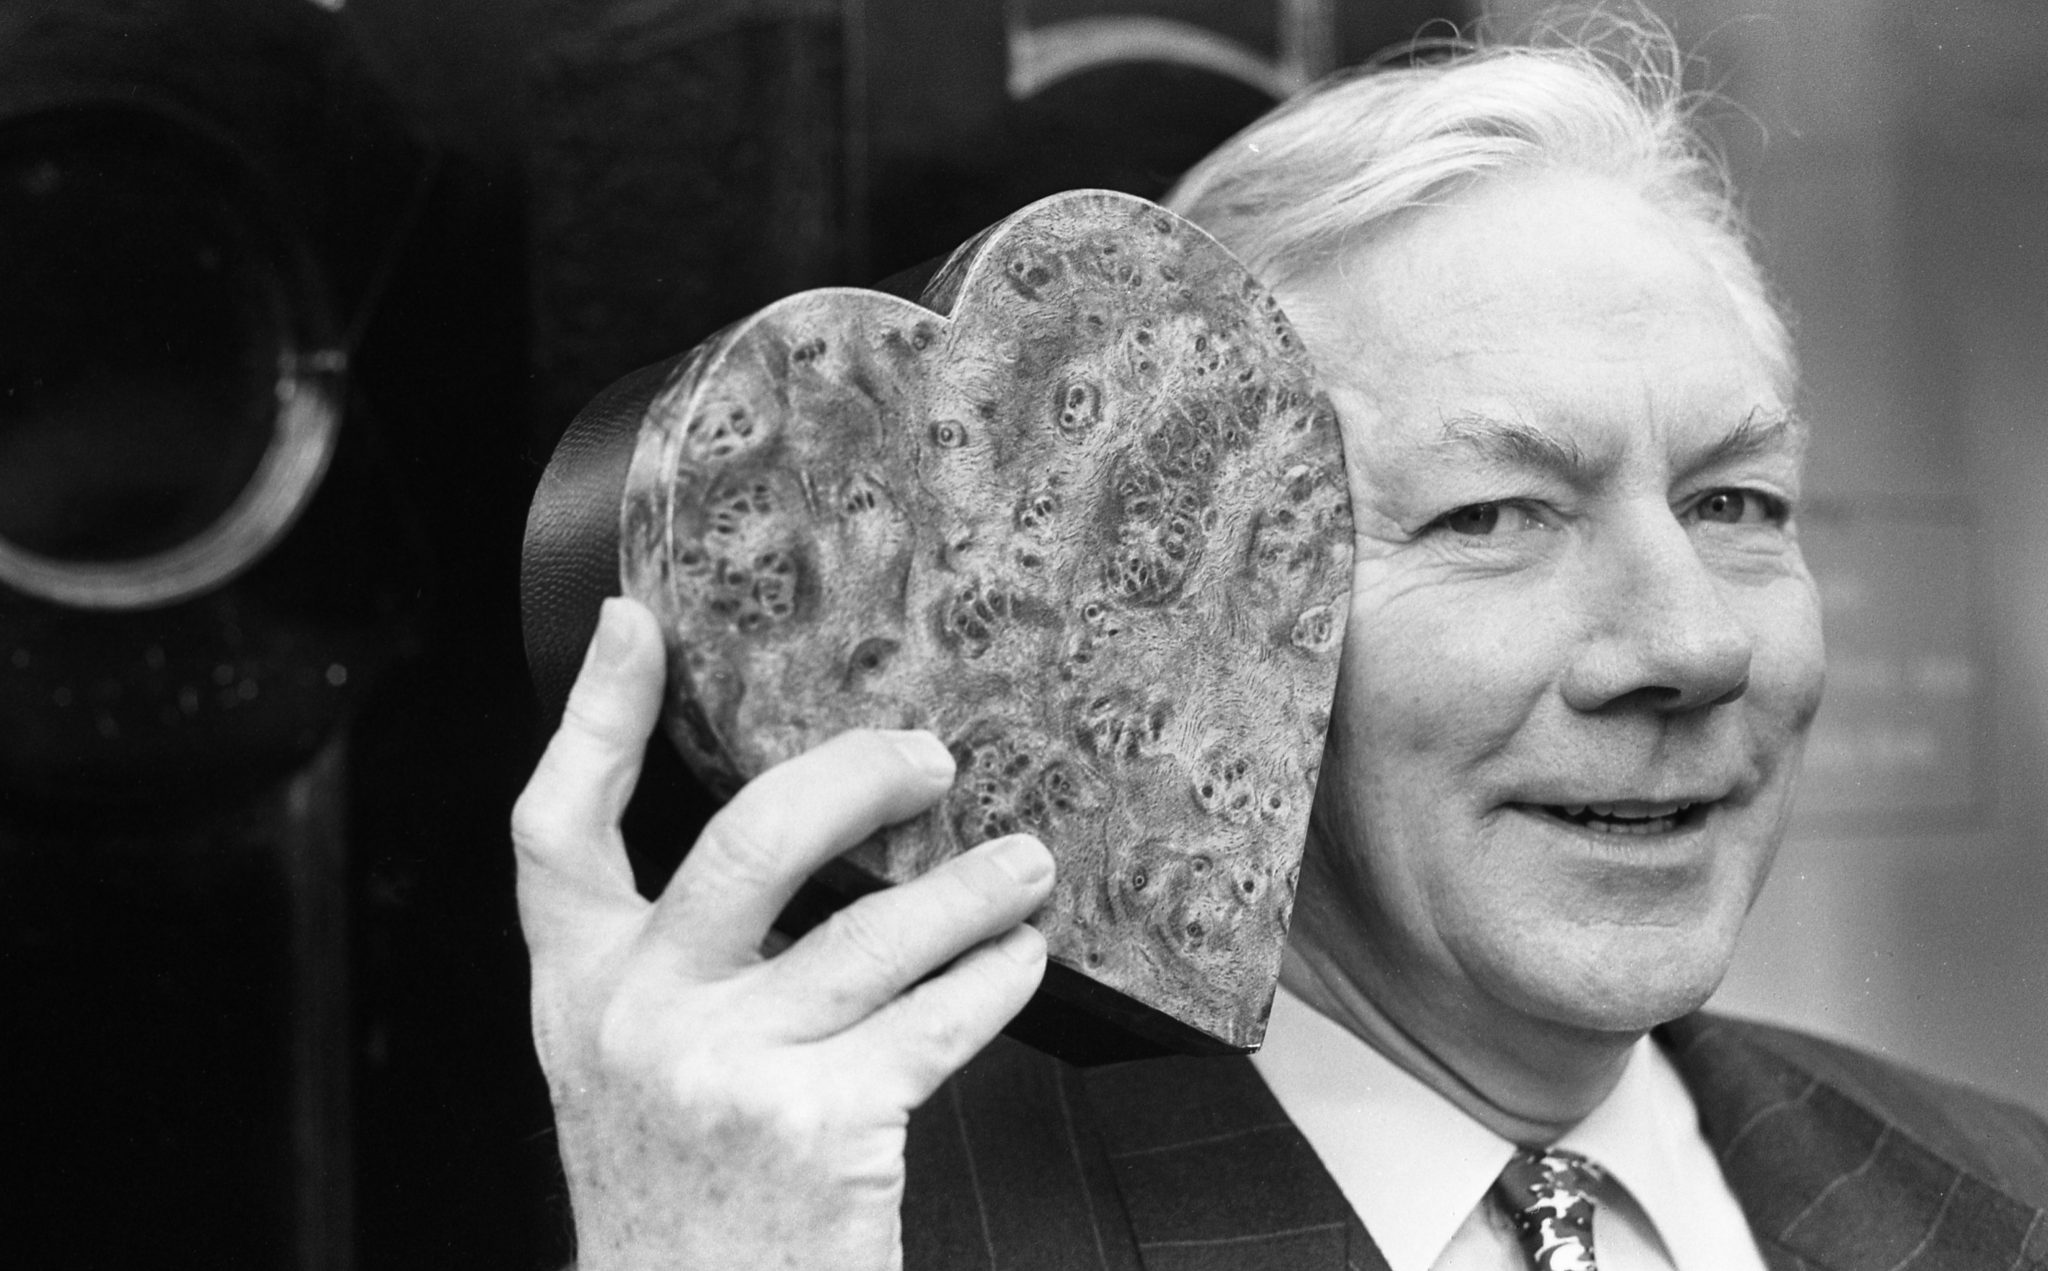 “Every other broadcaster is forever in his shadow” Miriam O’Callaghan pays tribute to Gay Byrne